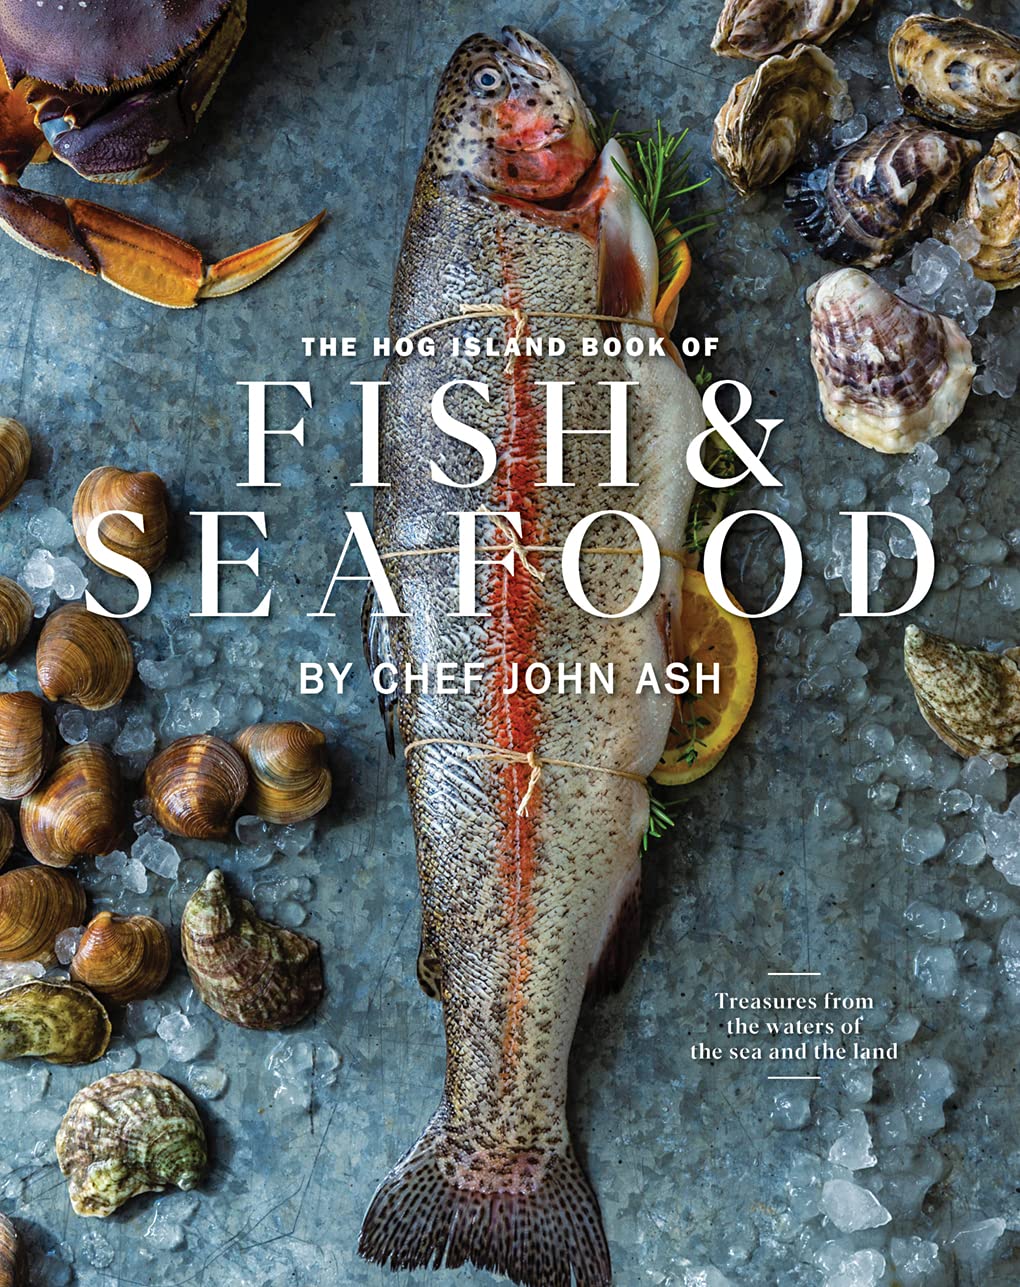 The Hog Island Book of Fish & Seafood: Culinary Treasures from Our Waters (John Ash) *Signed*